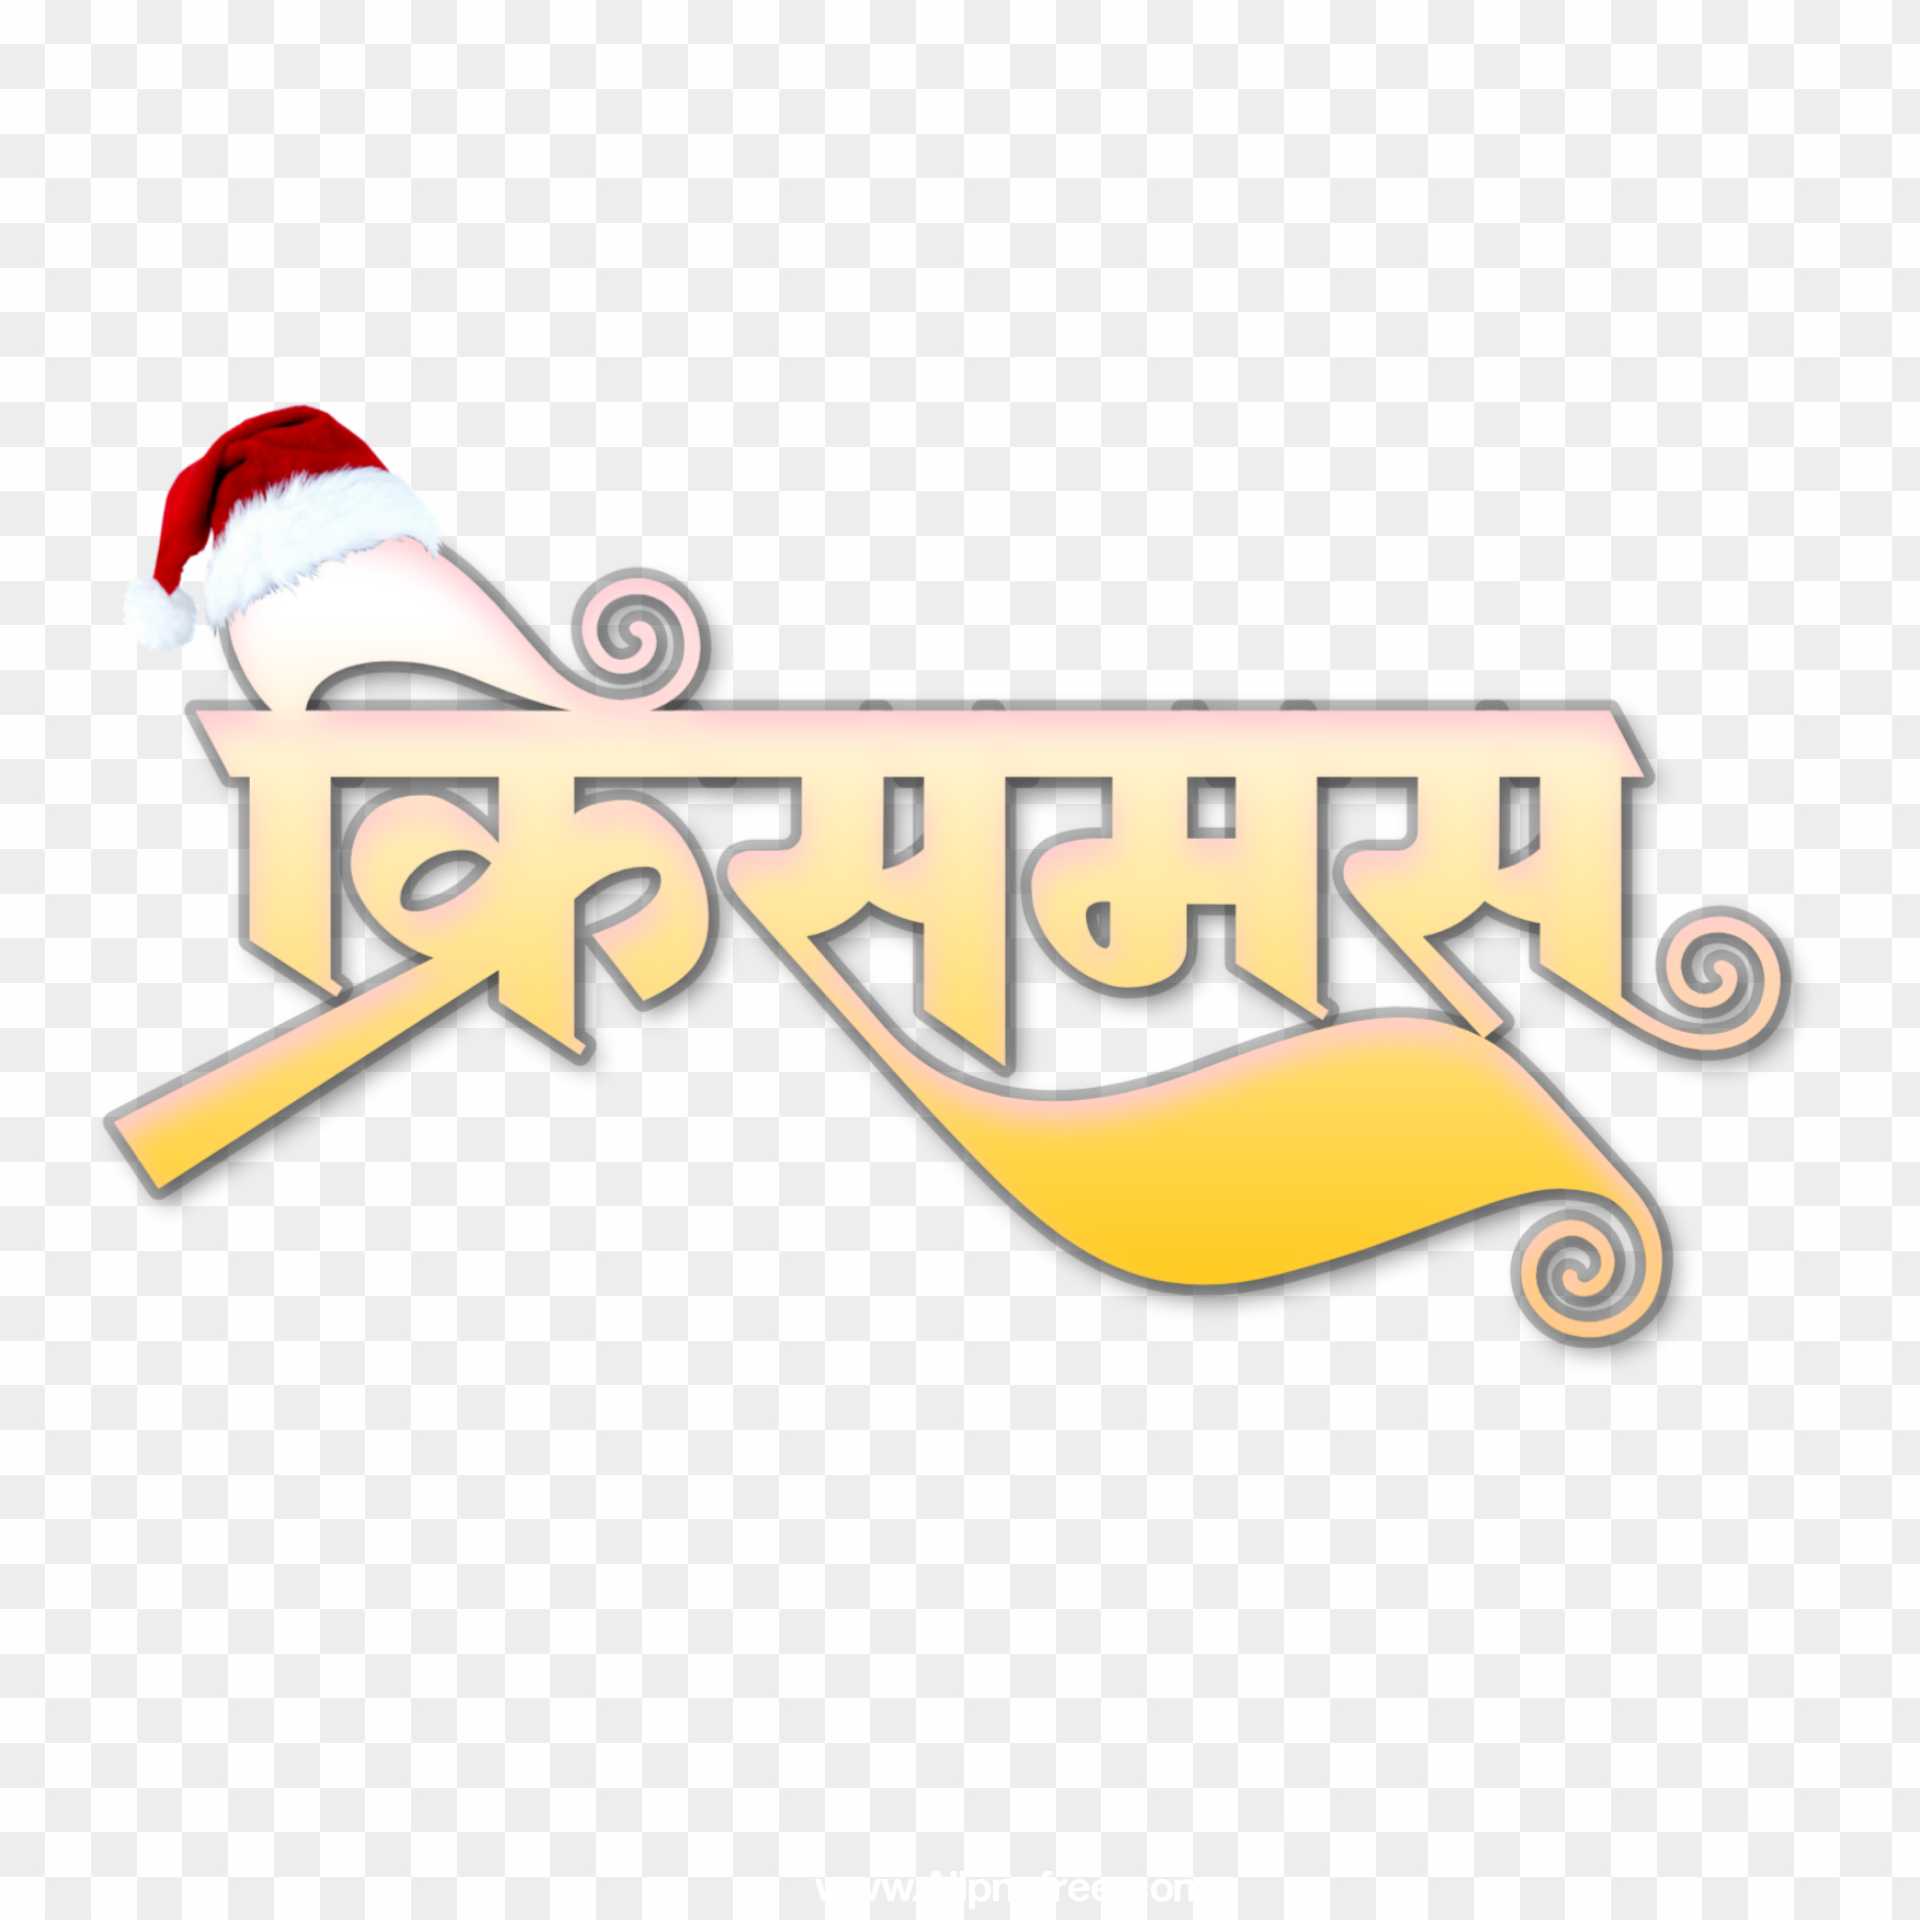 Christmas text PNG images download